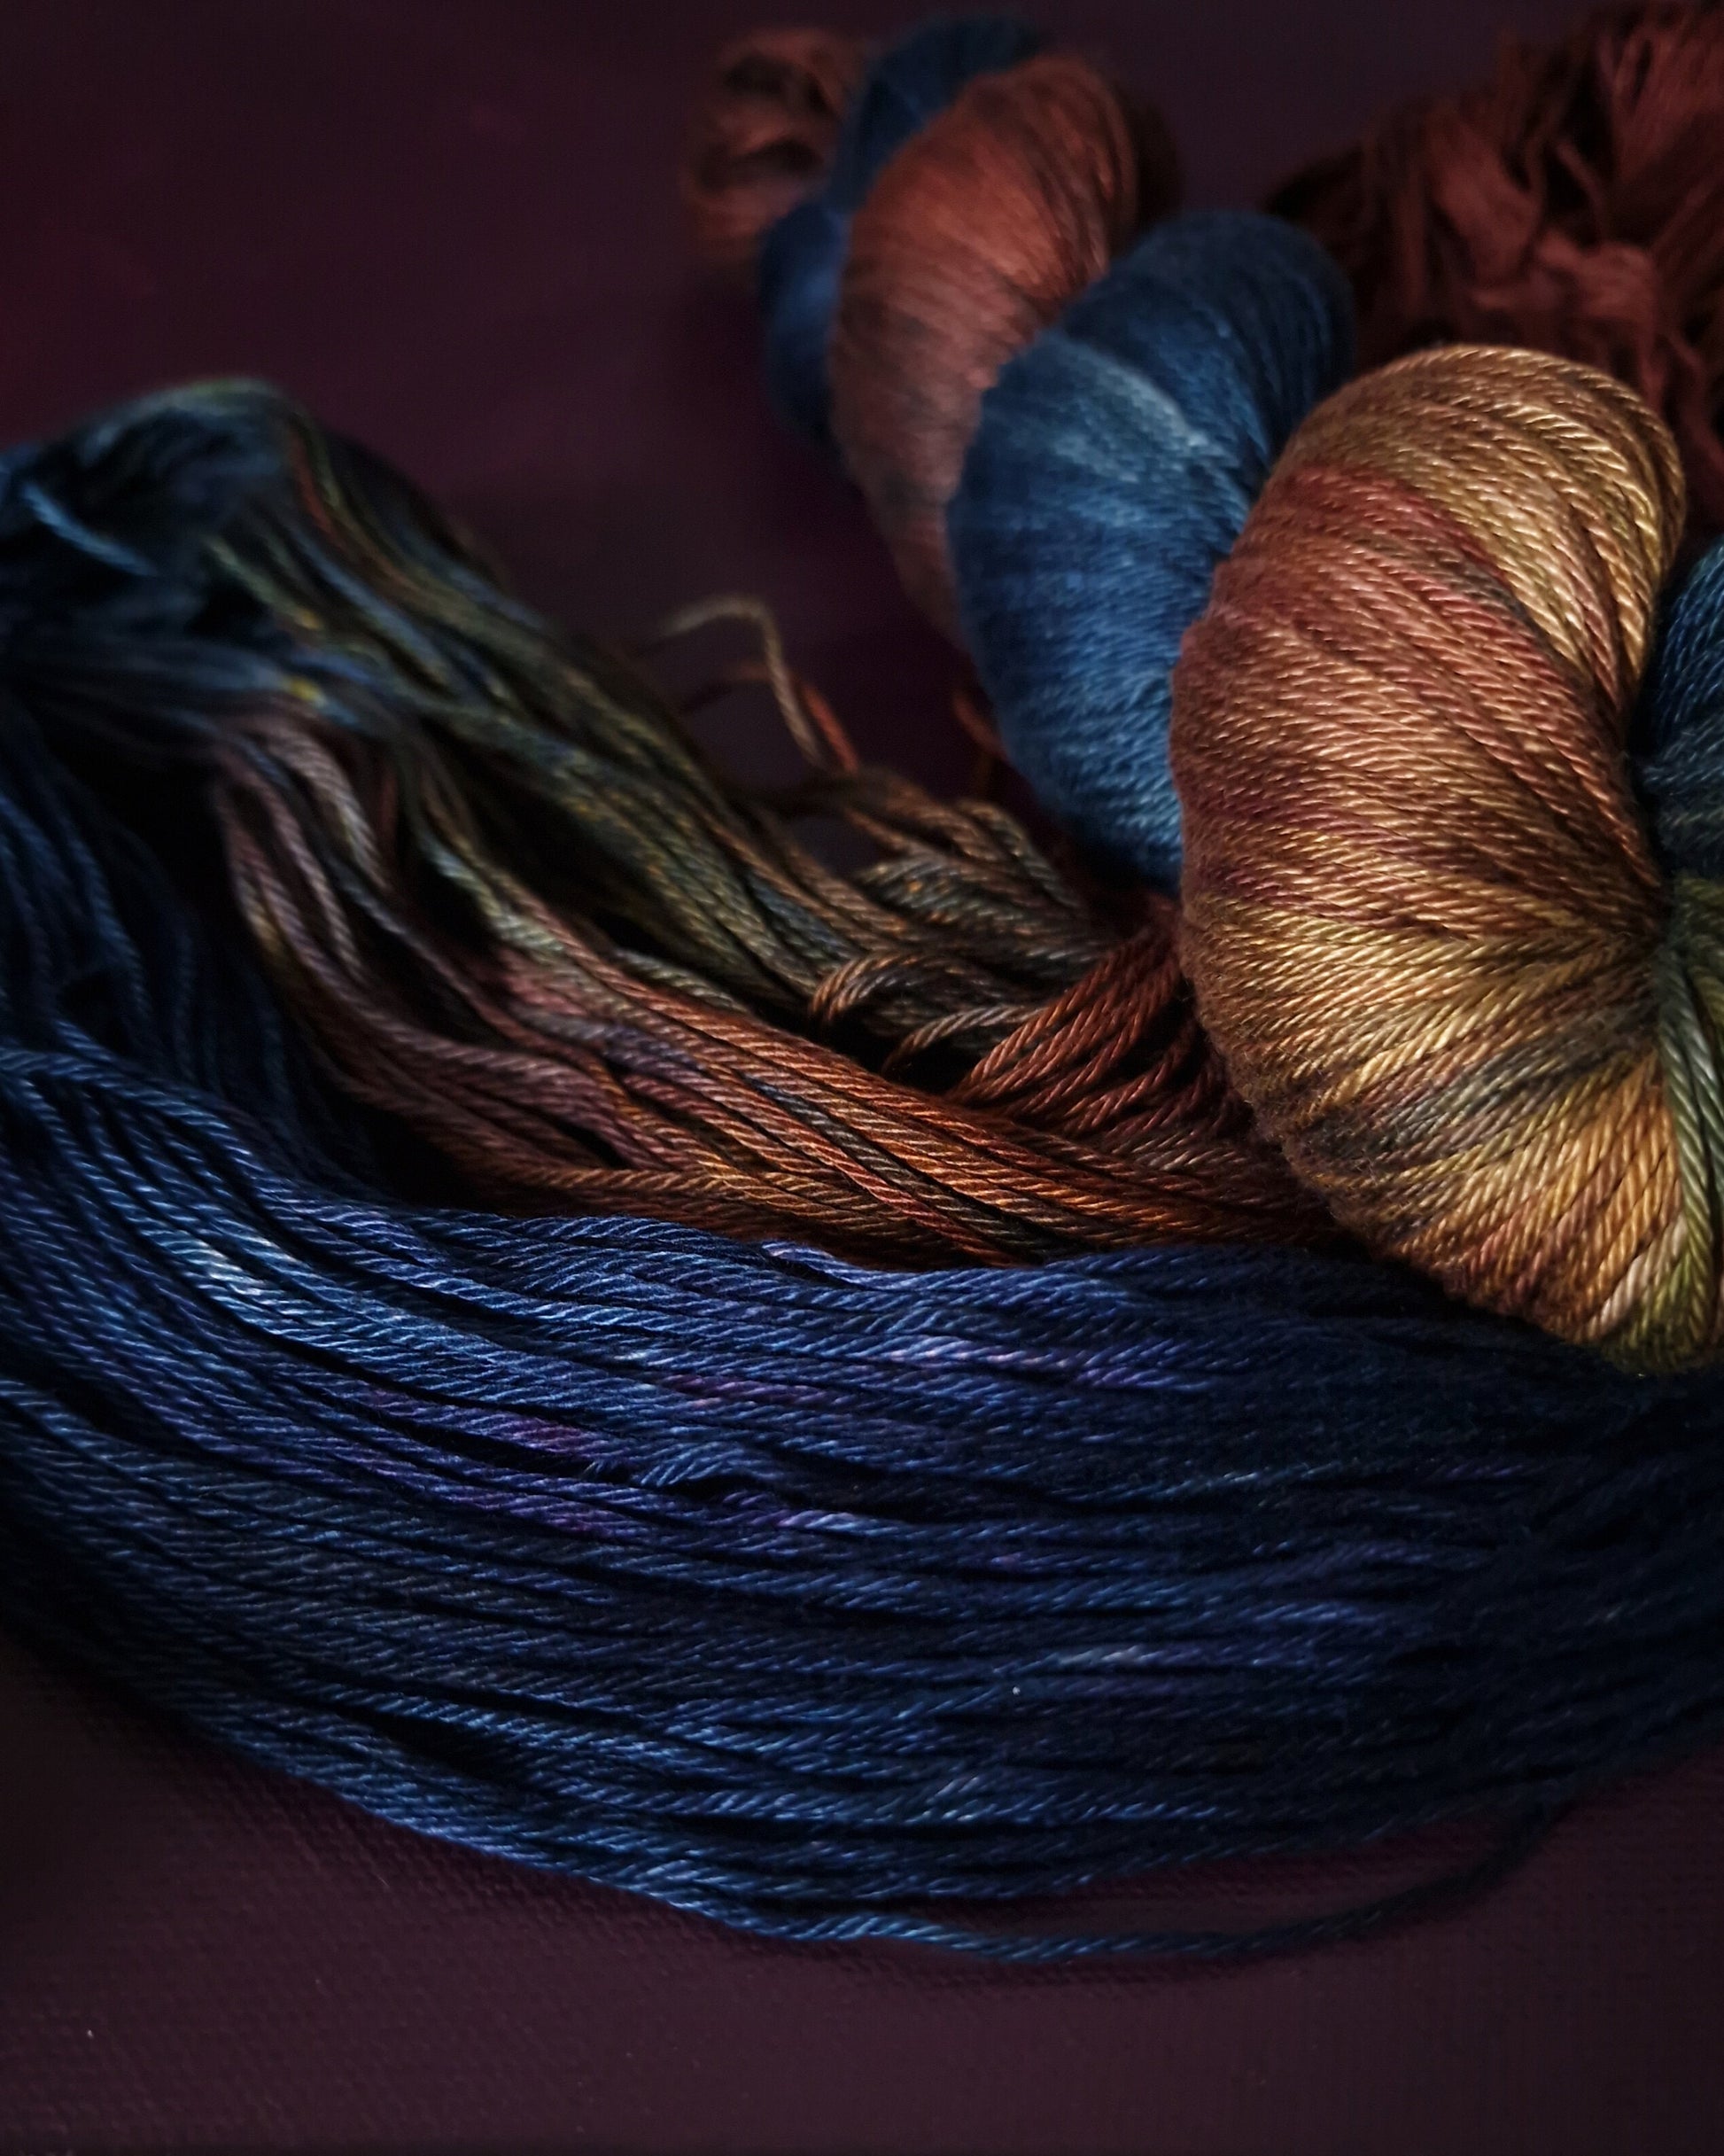 Hand dyed yarn ~ Sunset Delight No 7 ~ mercerized cotton yarn, vegan, hand painted, indie dyed